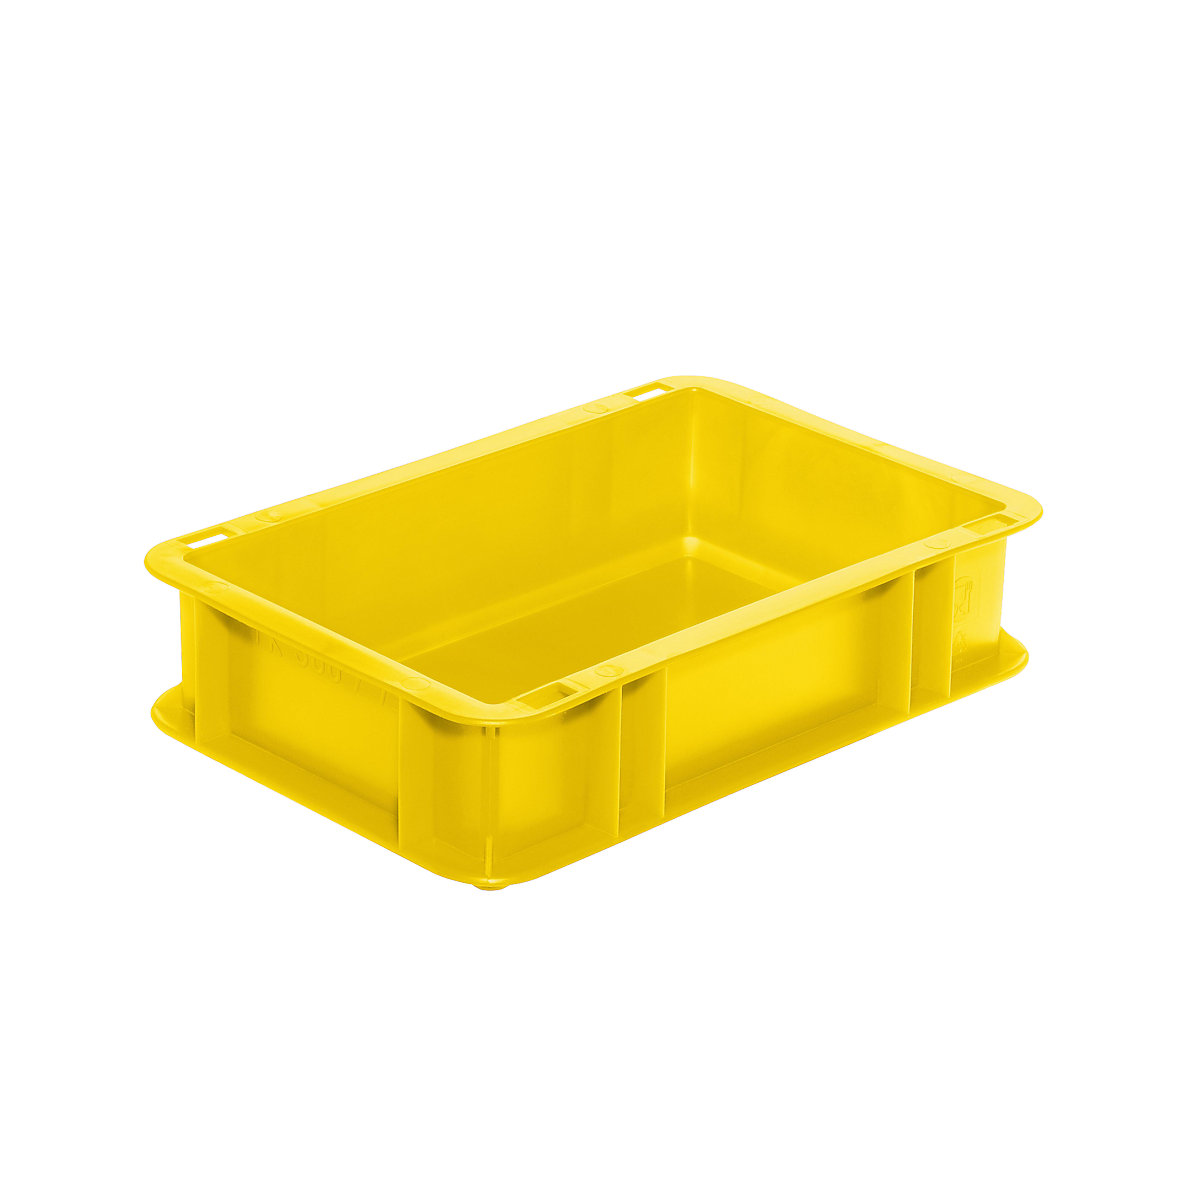 Euro stacking container, closed walls and base, LxWxH 300 x 200 x 75 mm, yellow, pack of 5